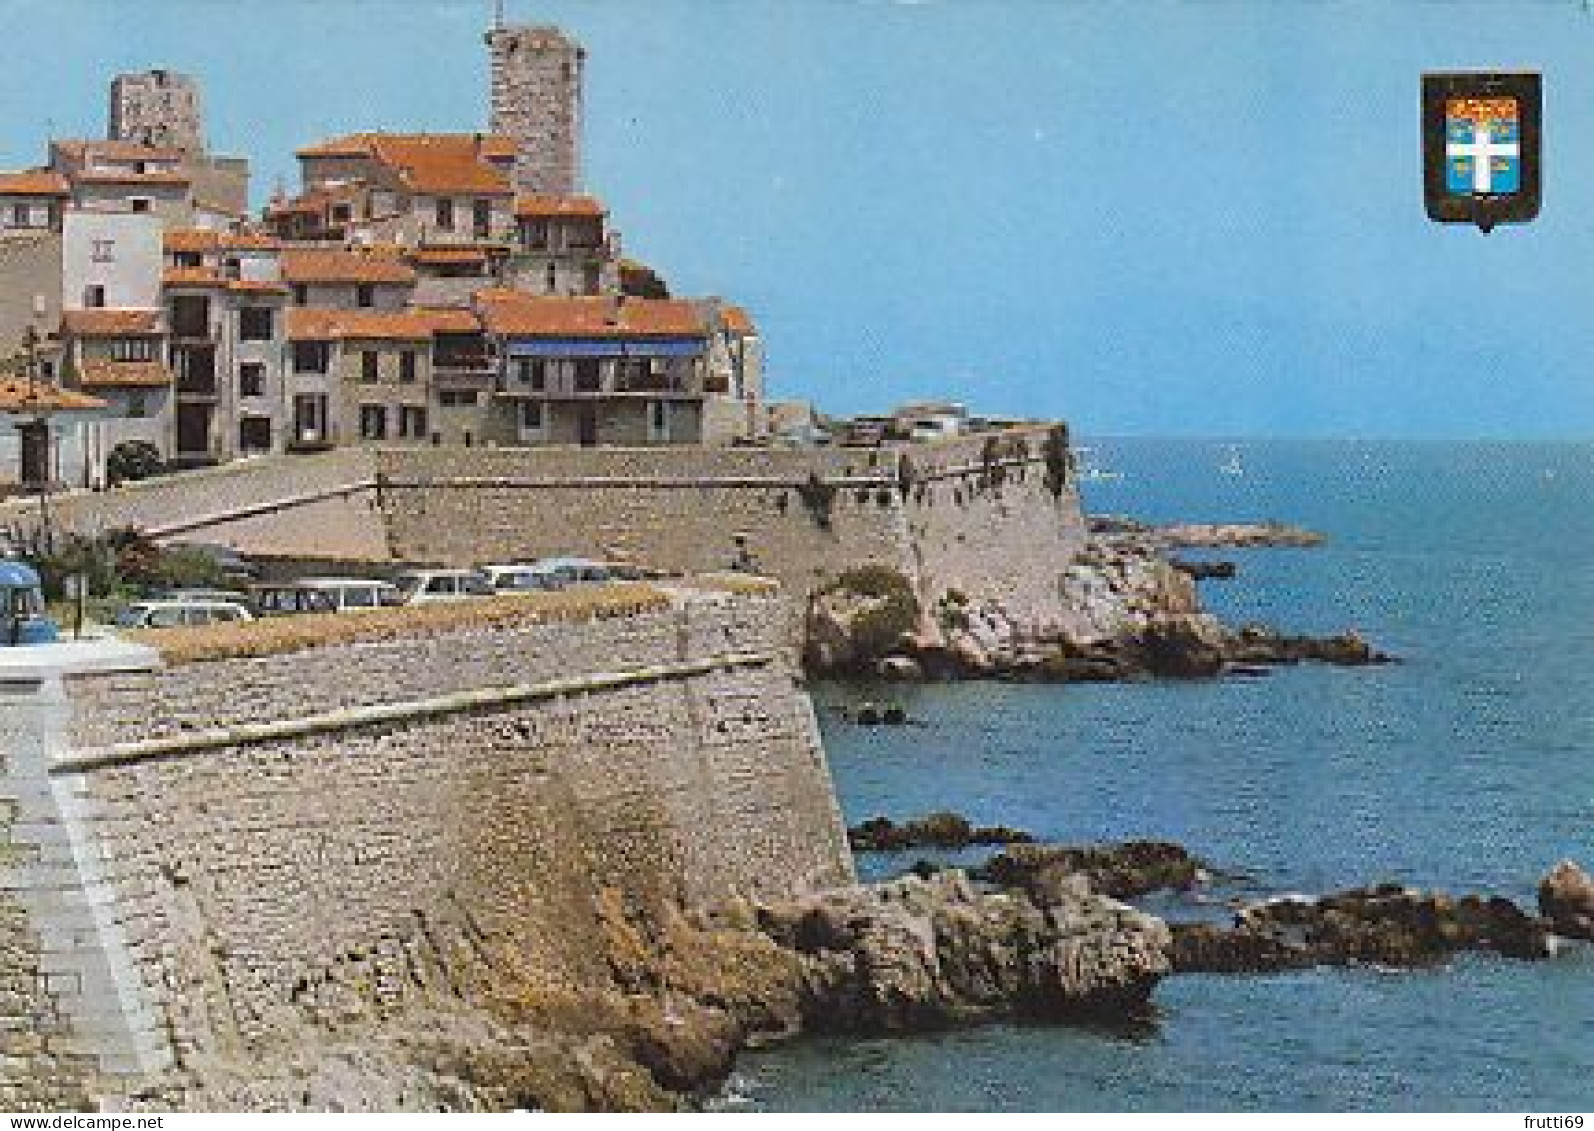 AK 210857 FRANCE - Antibes - Les Remparts - Antibes - Les Remparts